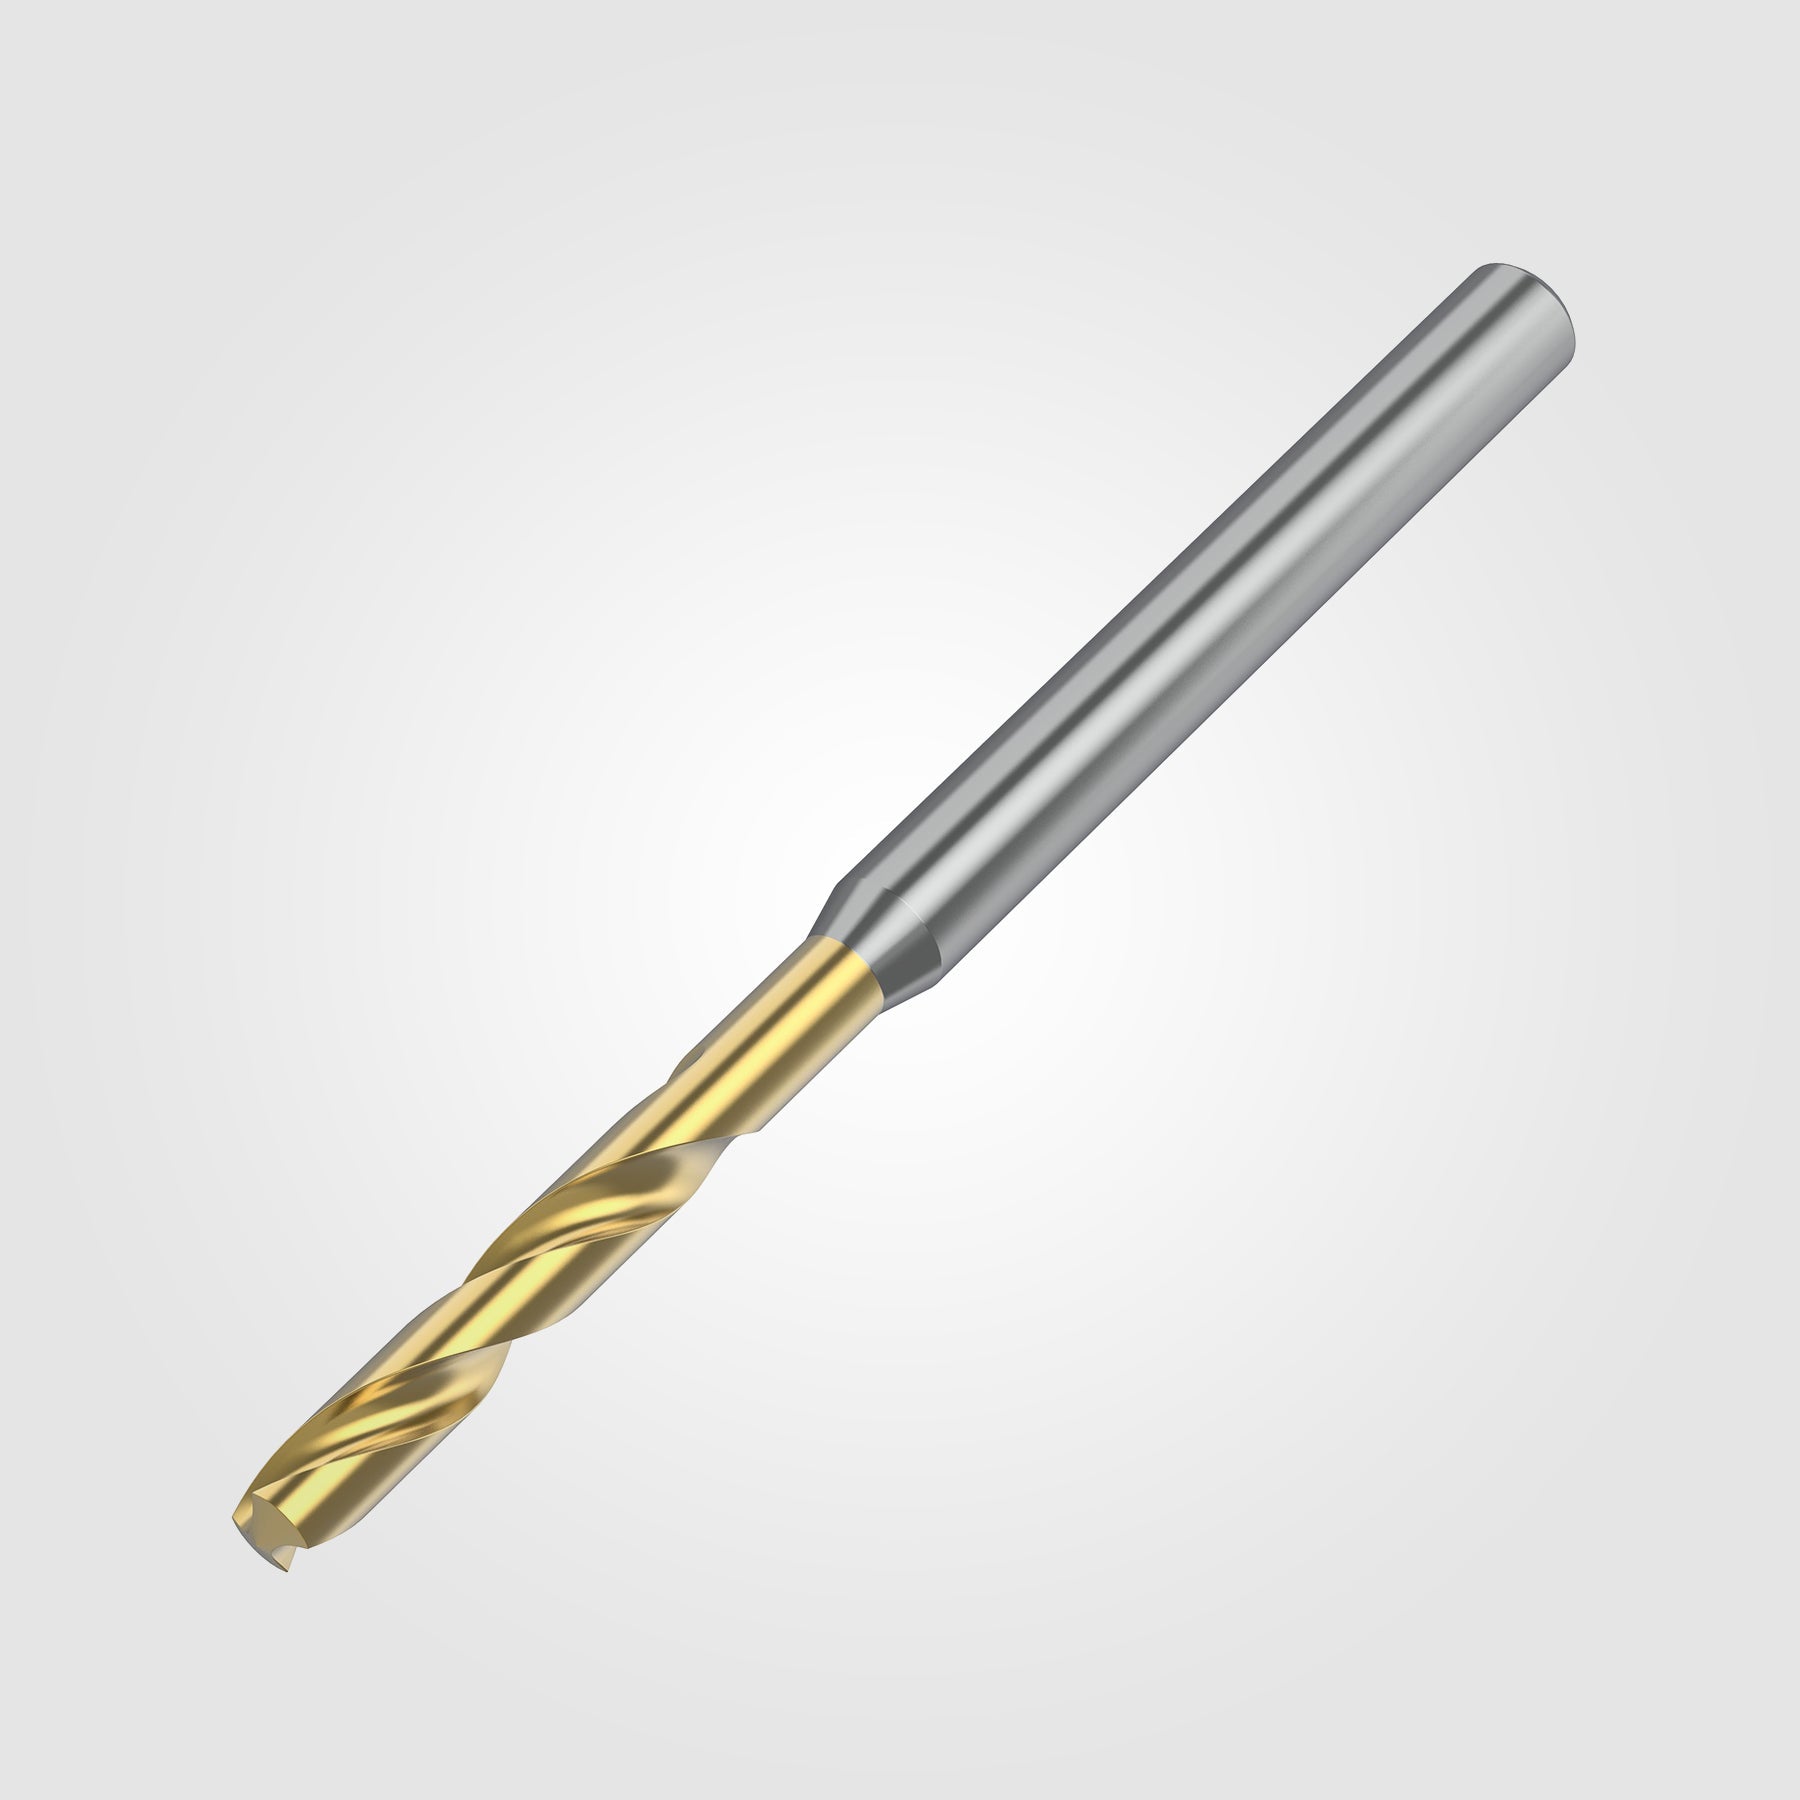 GOdrill (THROUGH COOLANT) | 3mm / .1181" / 5xD | SOLID CARBIDE DRILL | 4149125